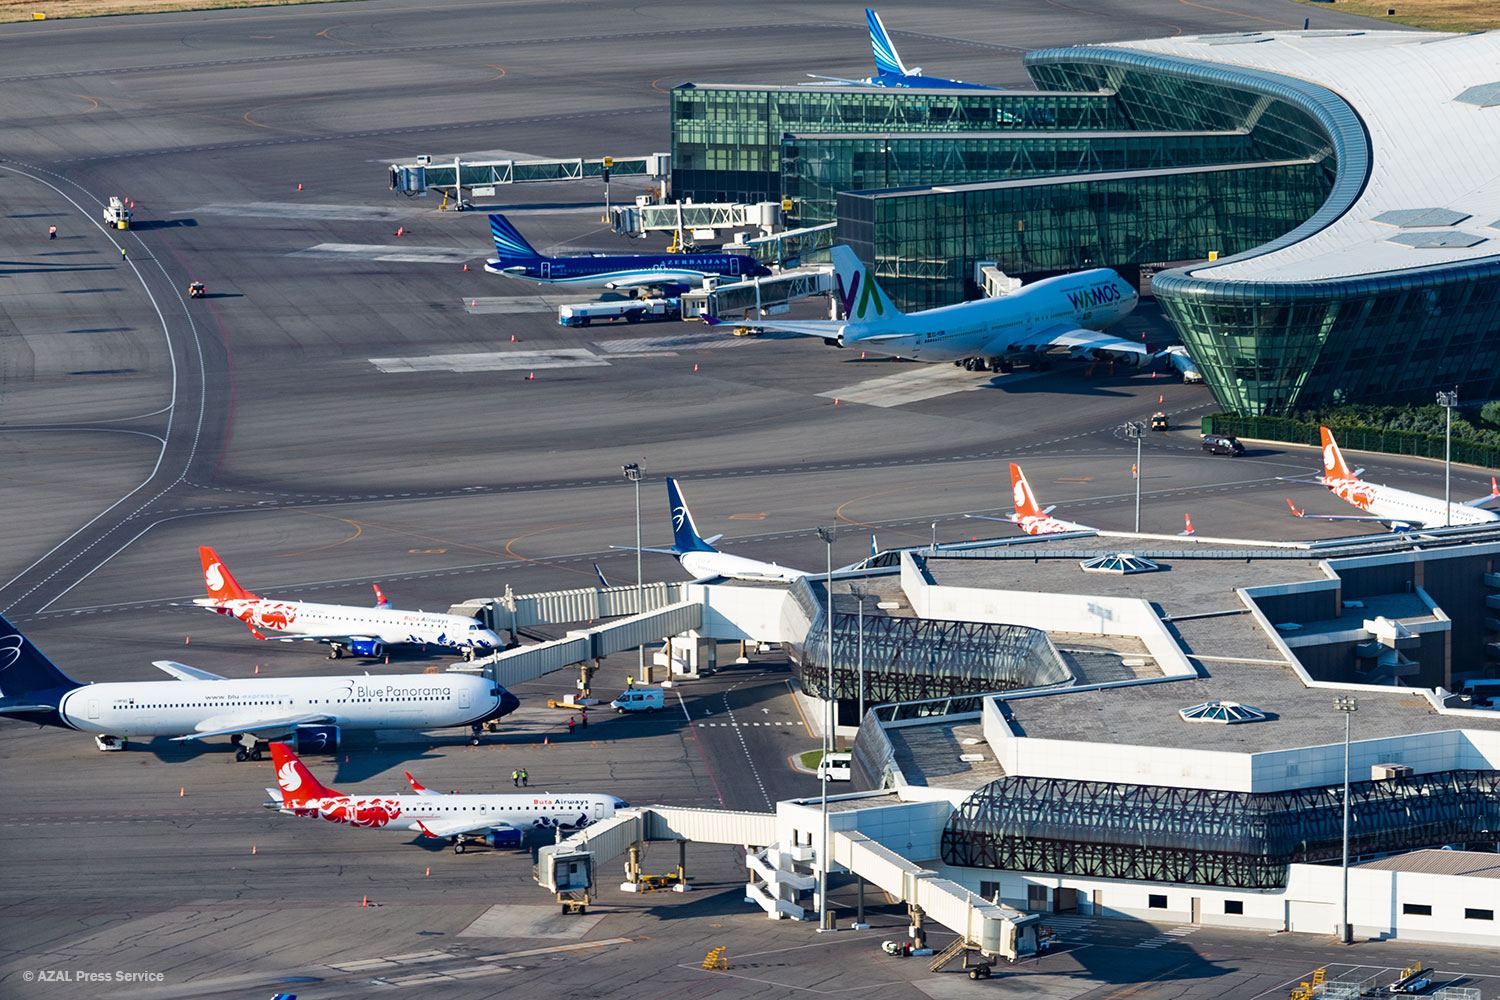 Civil airports of Azerbaijan served over 500,000 passengers in September